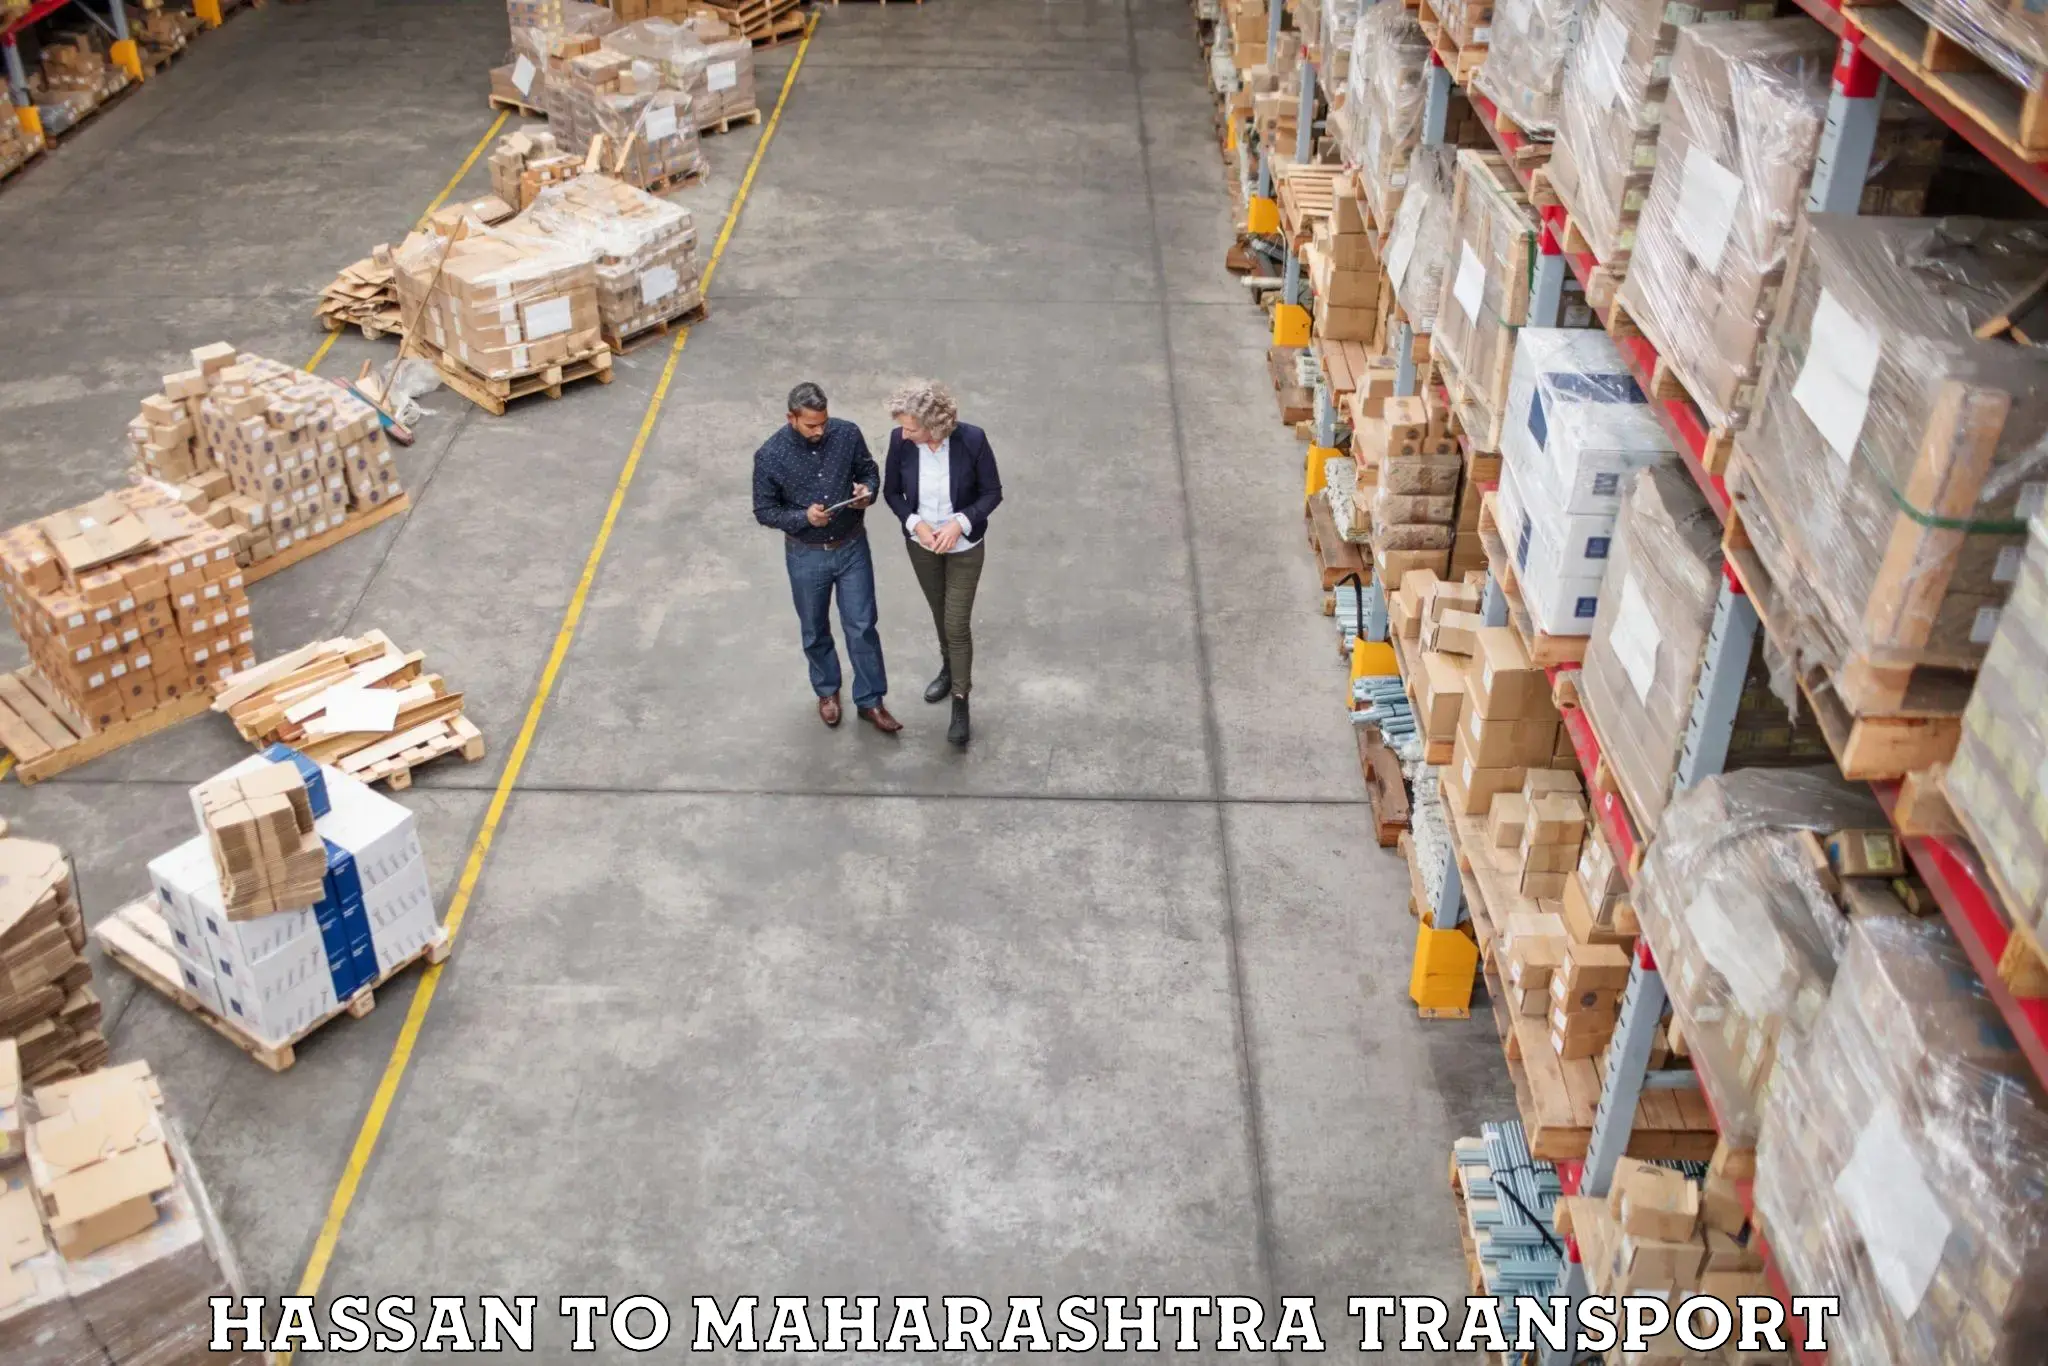 Truck transport companies in India Hassan to Talegaon Dabhade